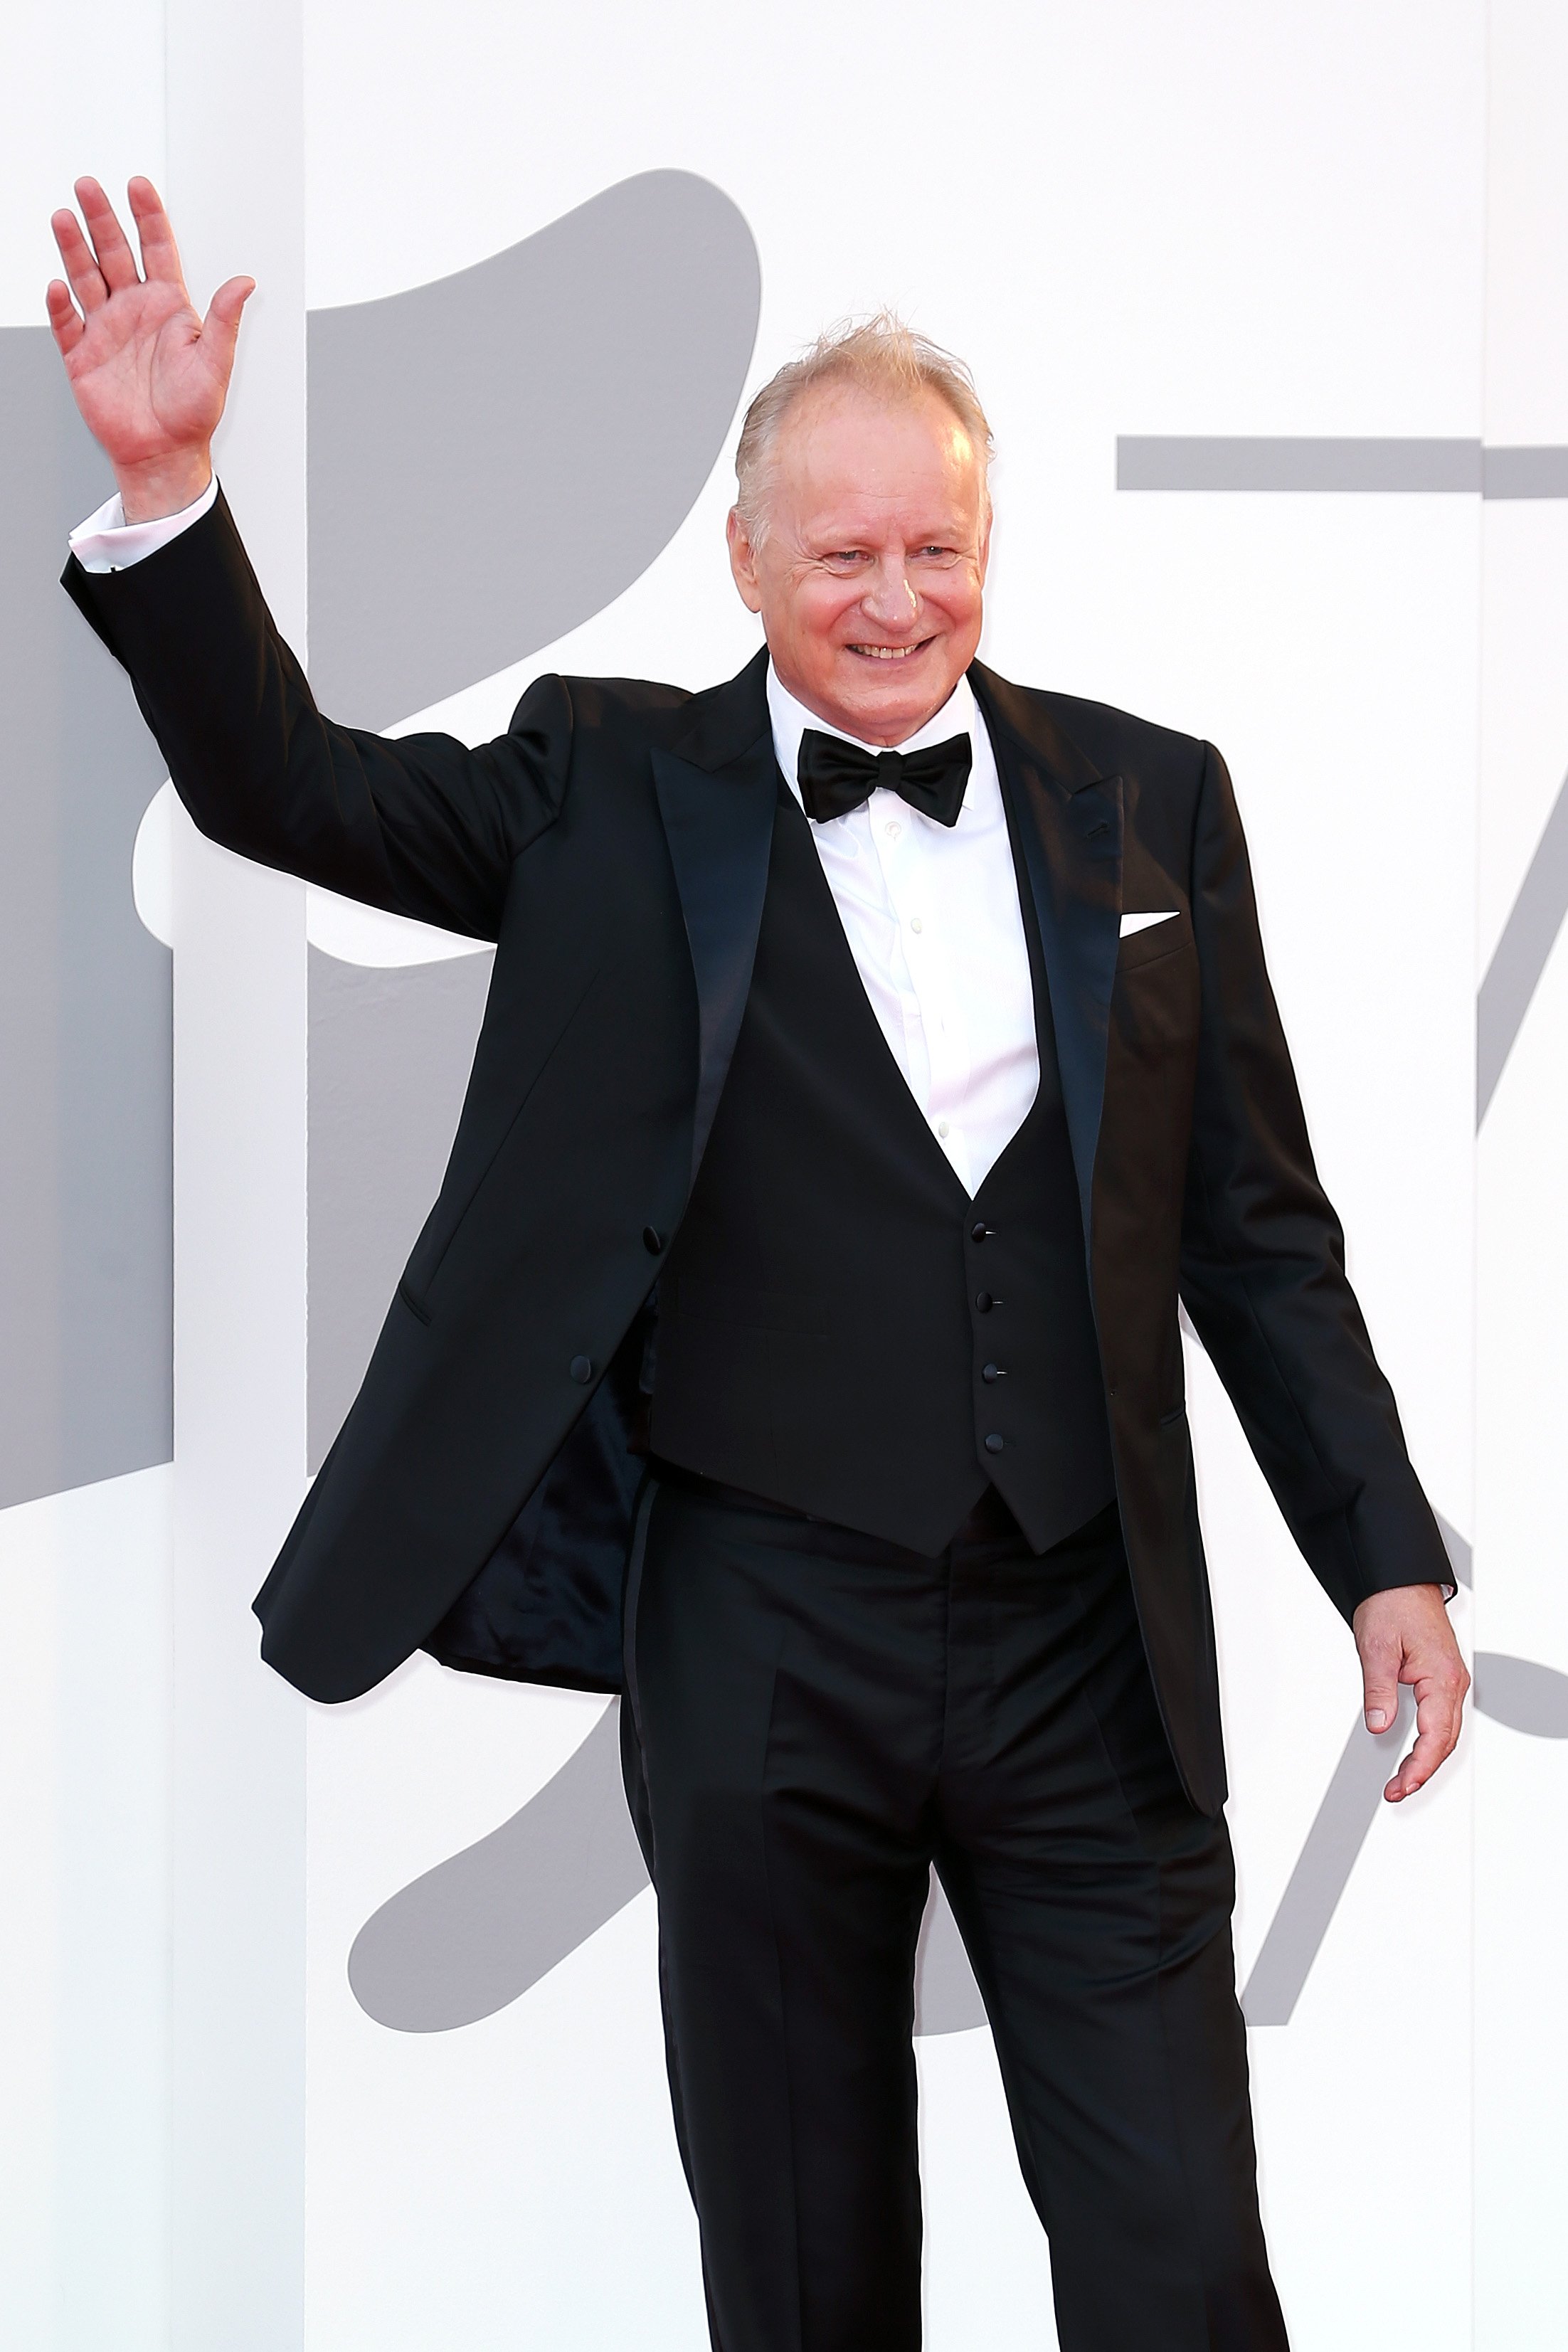 Stellan Skarsgård attends the red carpet of the movie "Dune" during the 78th Venice International Film Festival on September 03, 2021 in Venice, Italy | Source: Getty Images